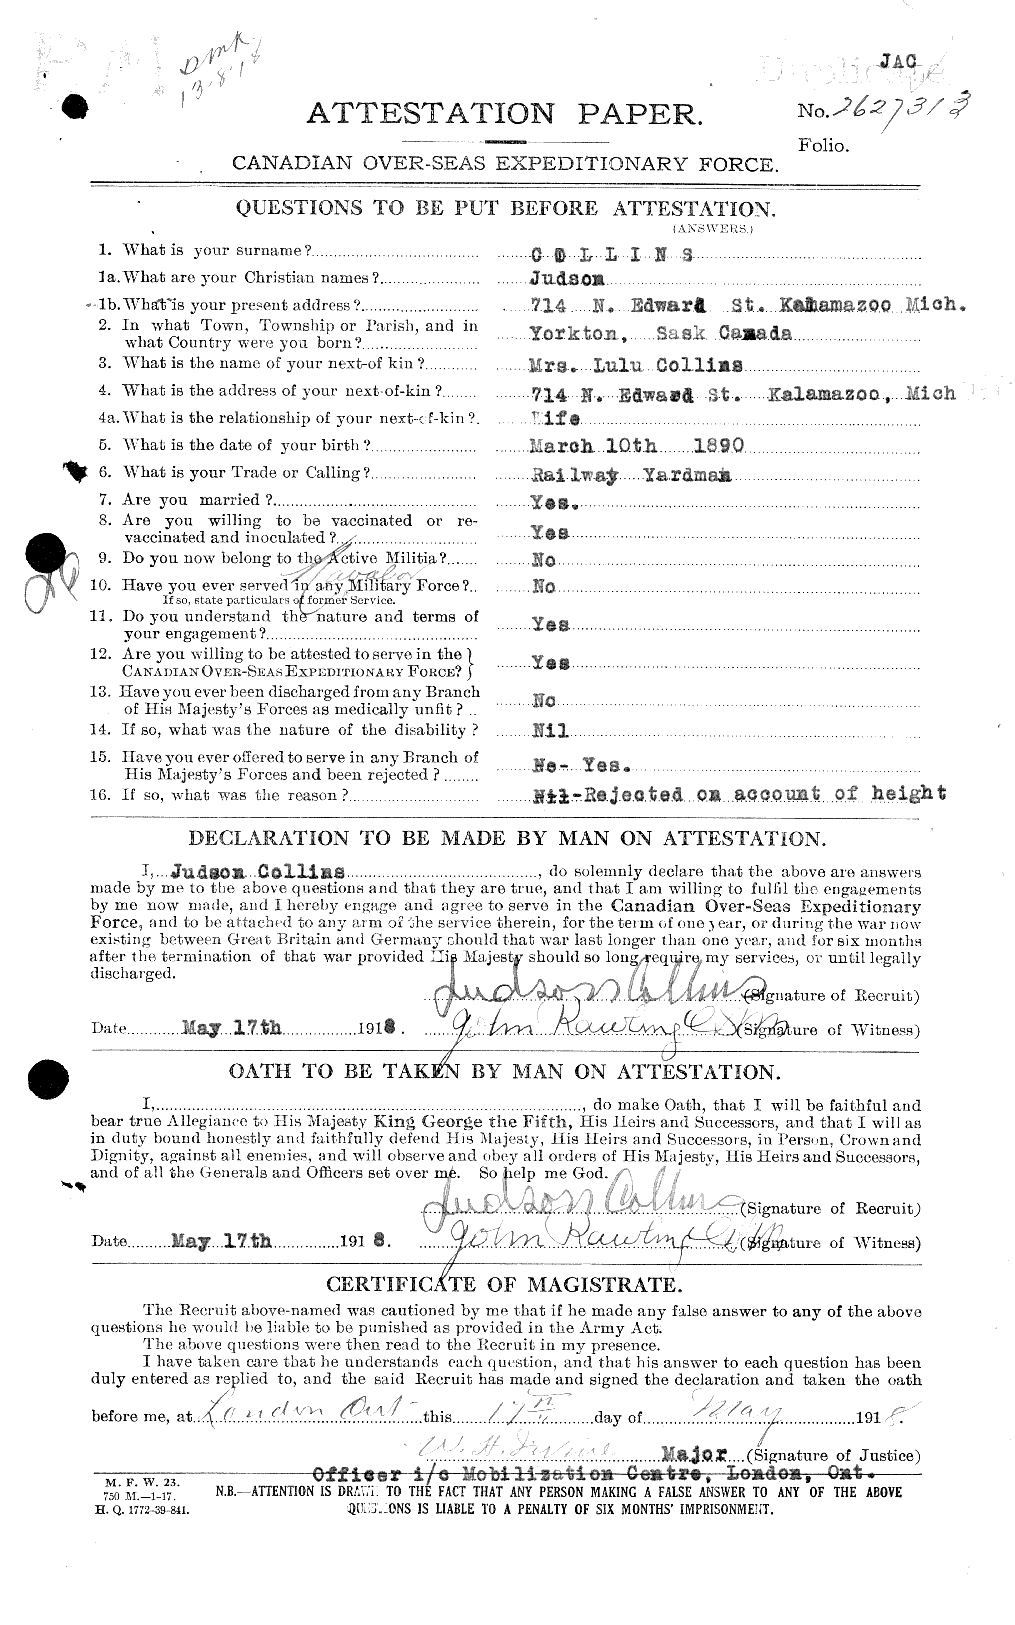 Personnel Records of the First World War - CEF 034433a